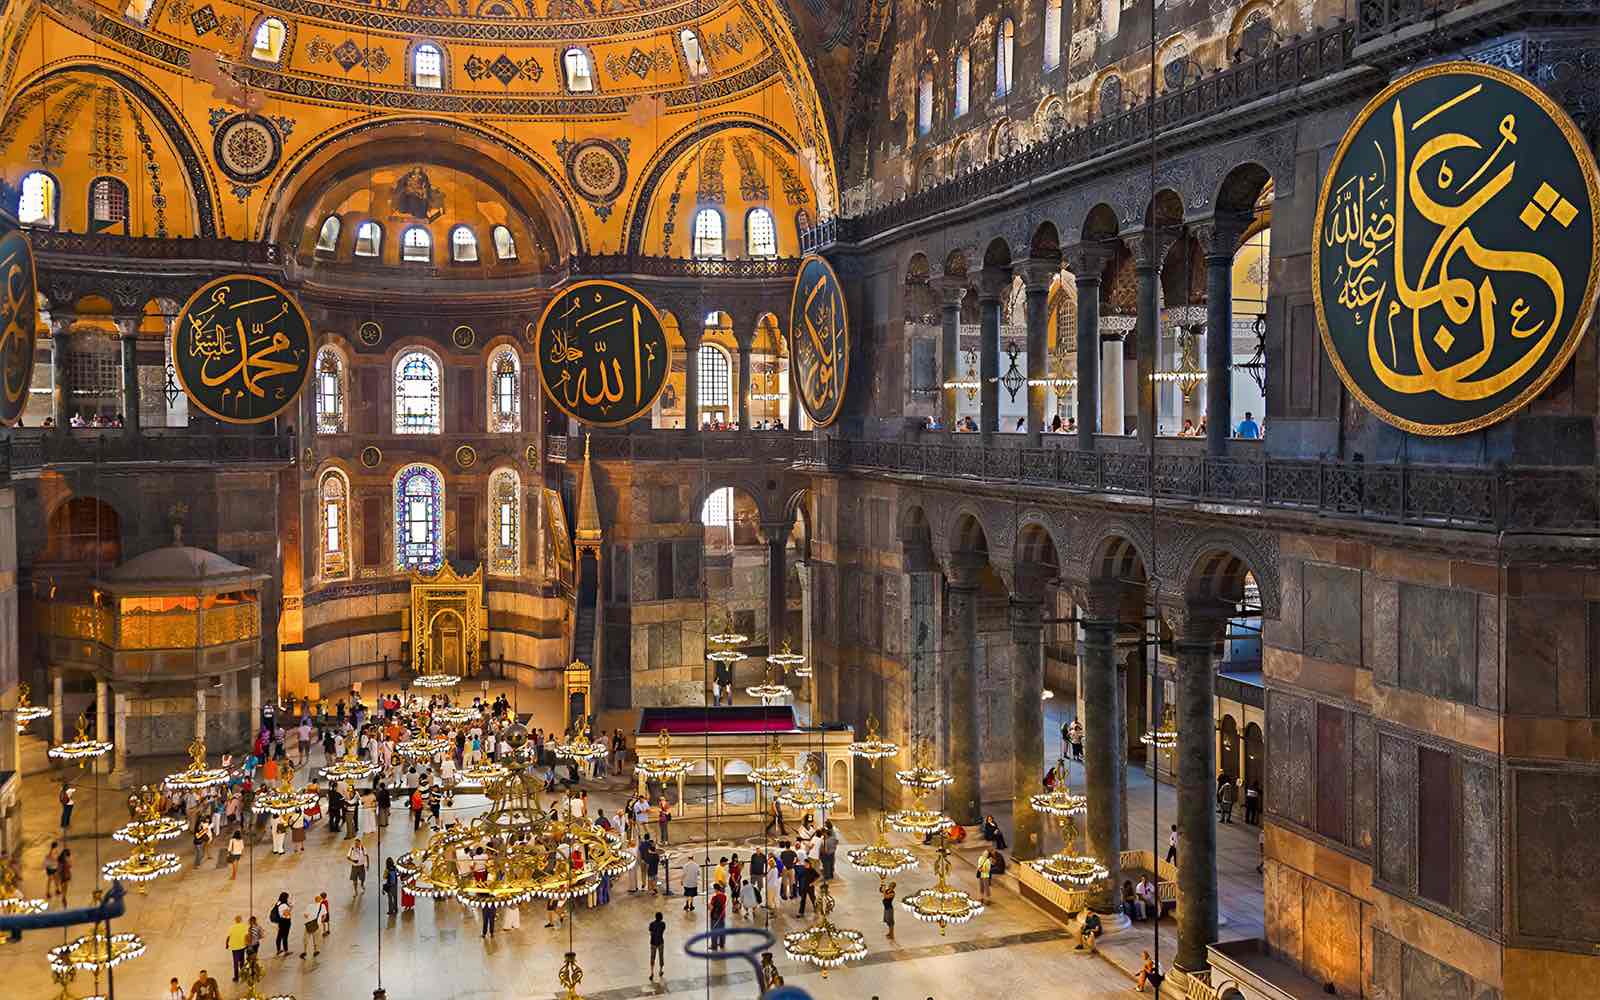 <p><strong>Hagia Sophia</strong></p><p>Early Byzantine Europe</p><p>Constantinople (Istanbul), Turkey</p><p>532-537 CE</p><p>Brick and ceramic elements with stone and mosaic veneer</p>